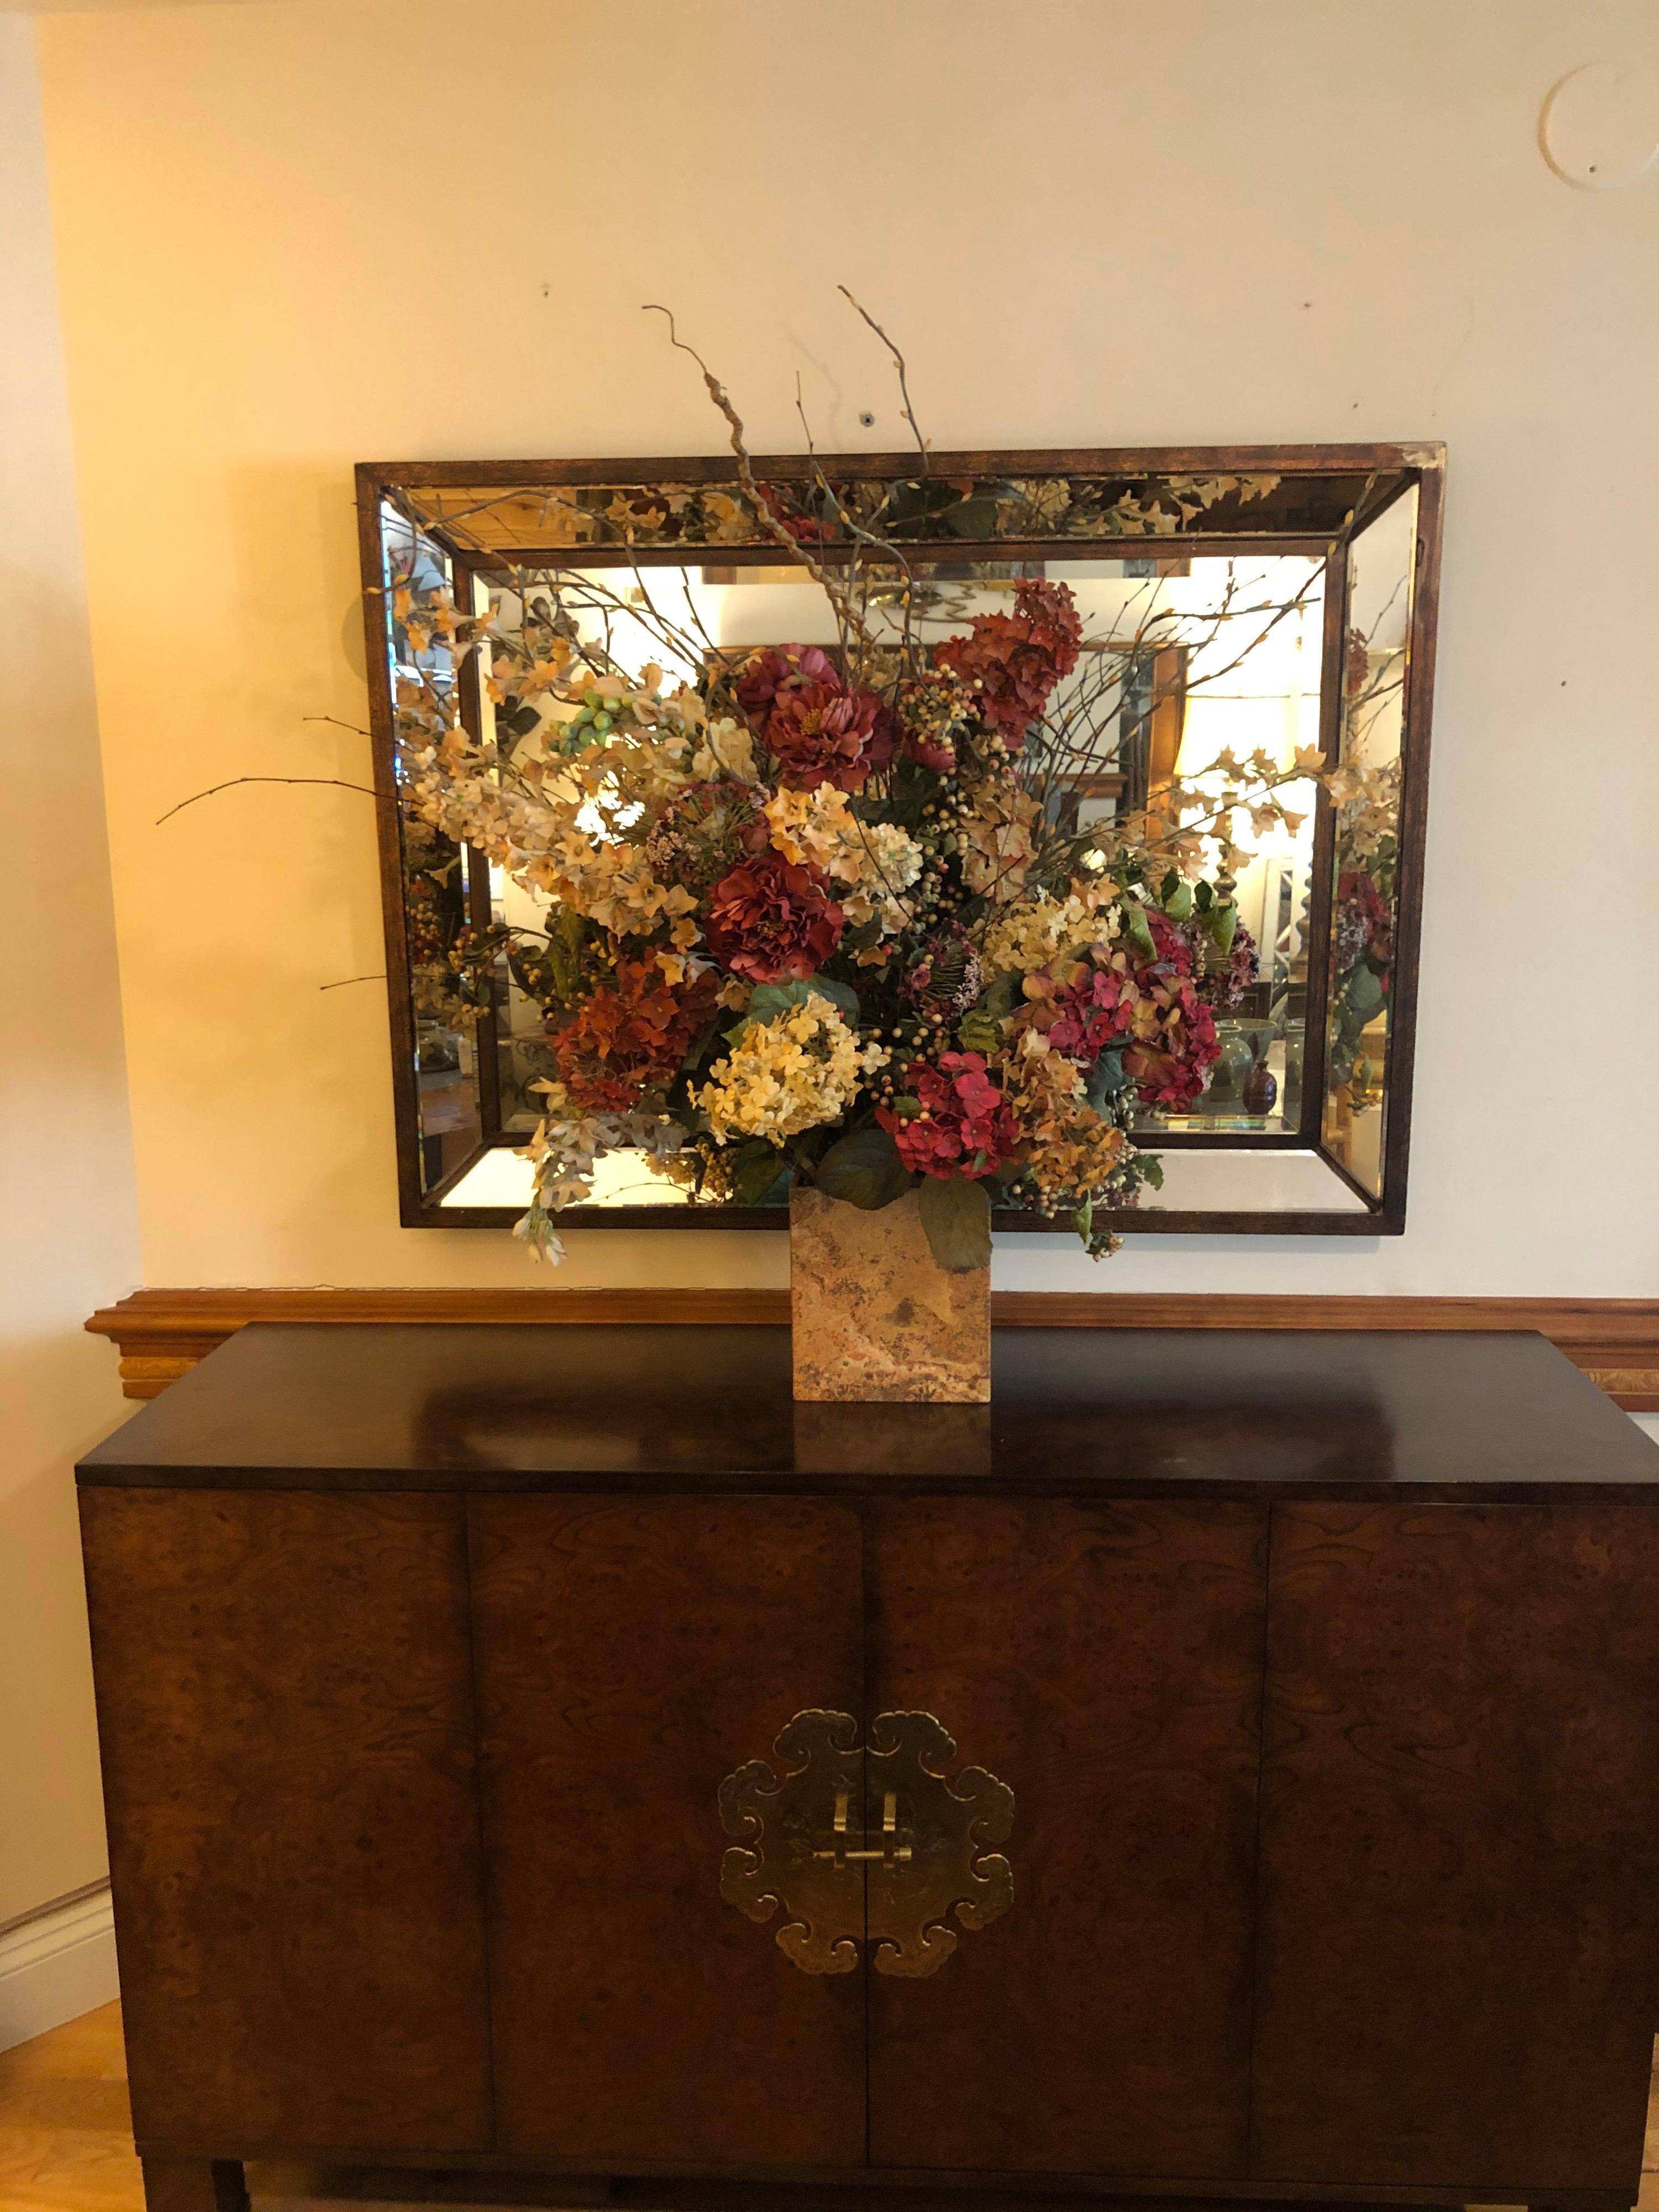 Large silk flower arrangement in a mate finish marble or travertine base. Professionally done with a  palette of soft muted reds and rose colored flowers with green leaves and thick spiked wooden verticals to give it texture. This arrangement will